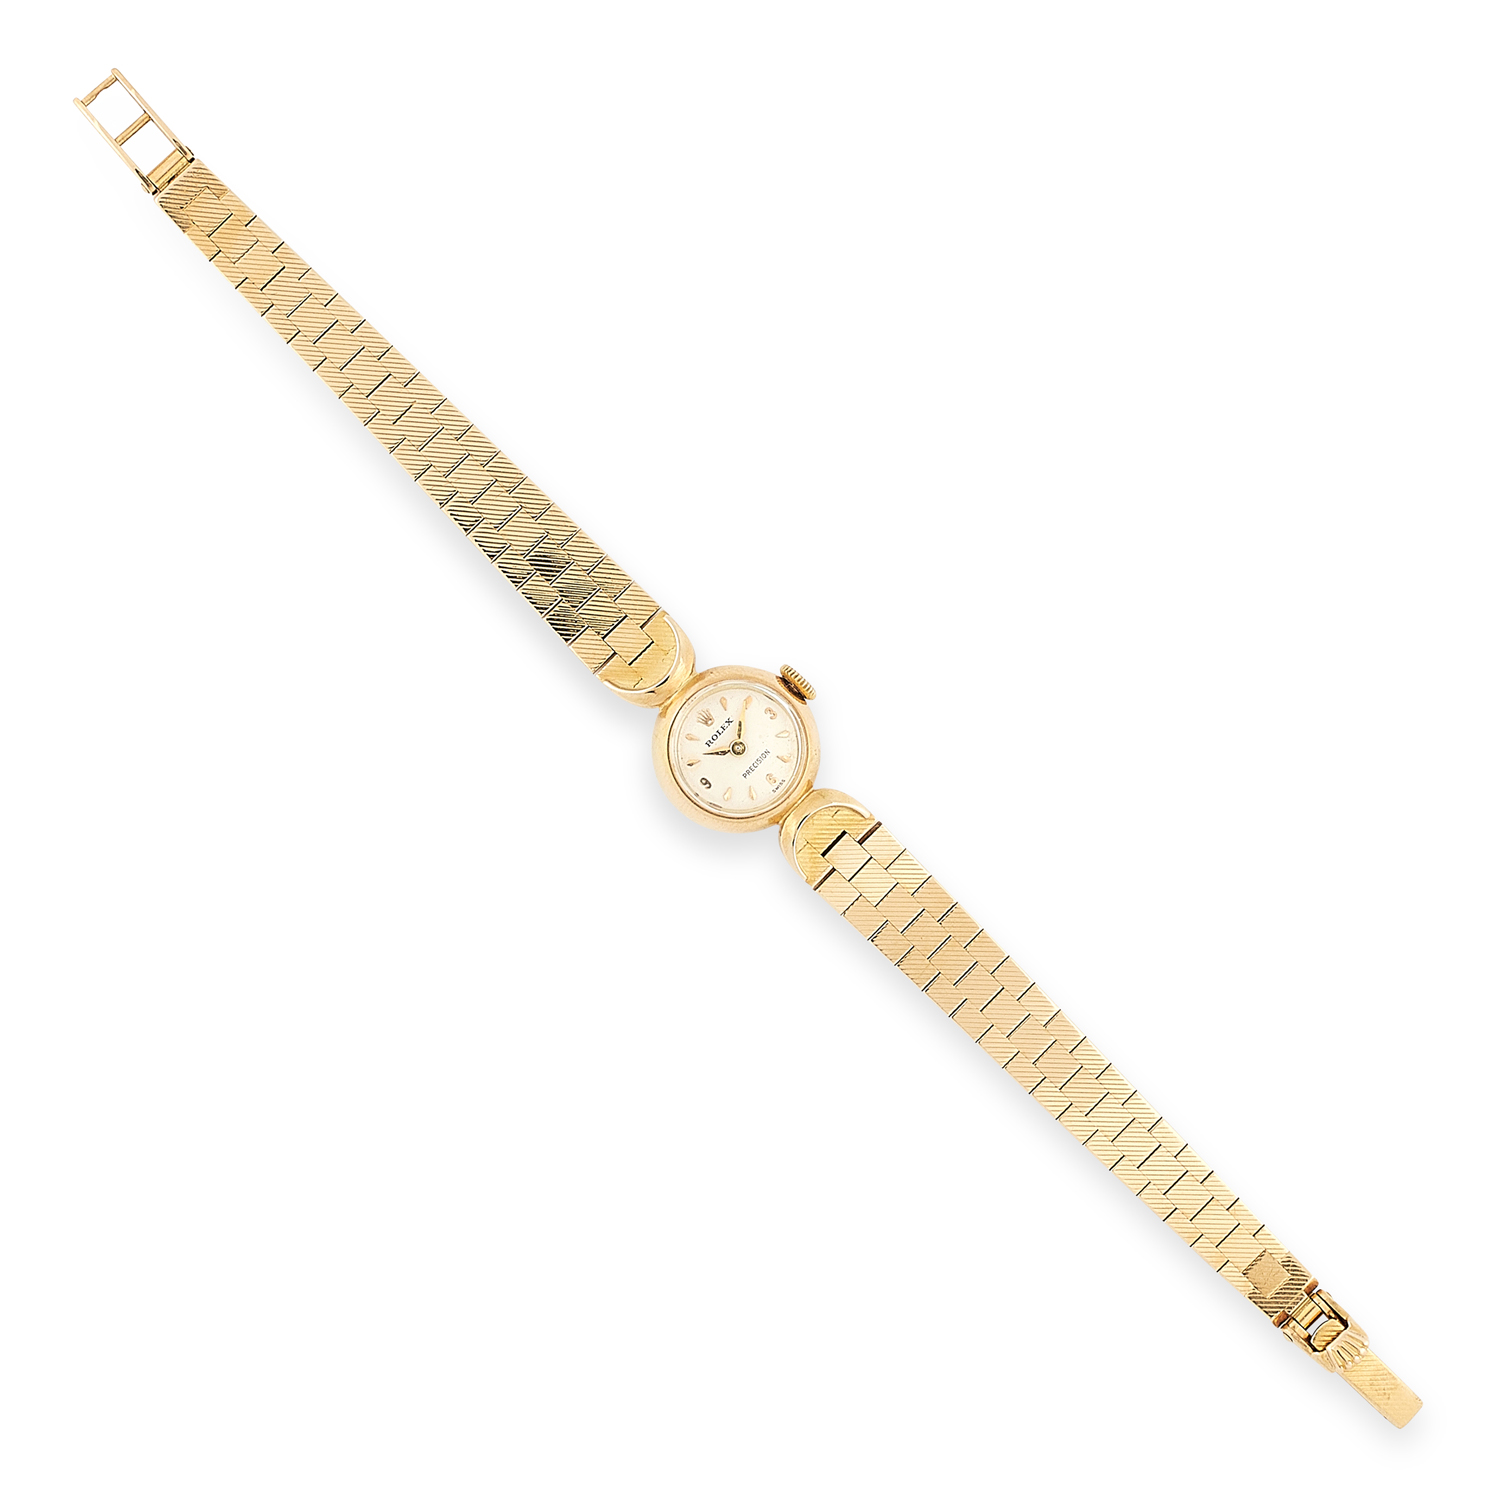 A VINTAGE ROLEX COCKTAIL WATCH in 18ct yellow gold, the circular dial set within a textured tapering